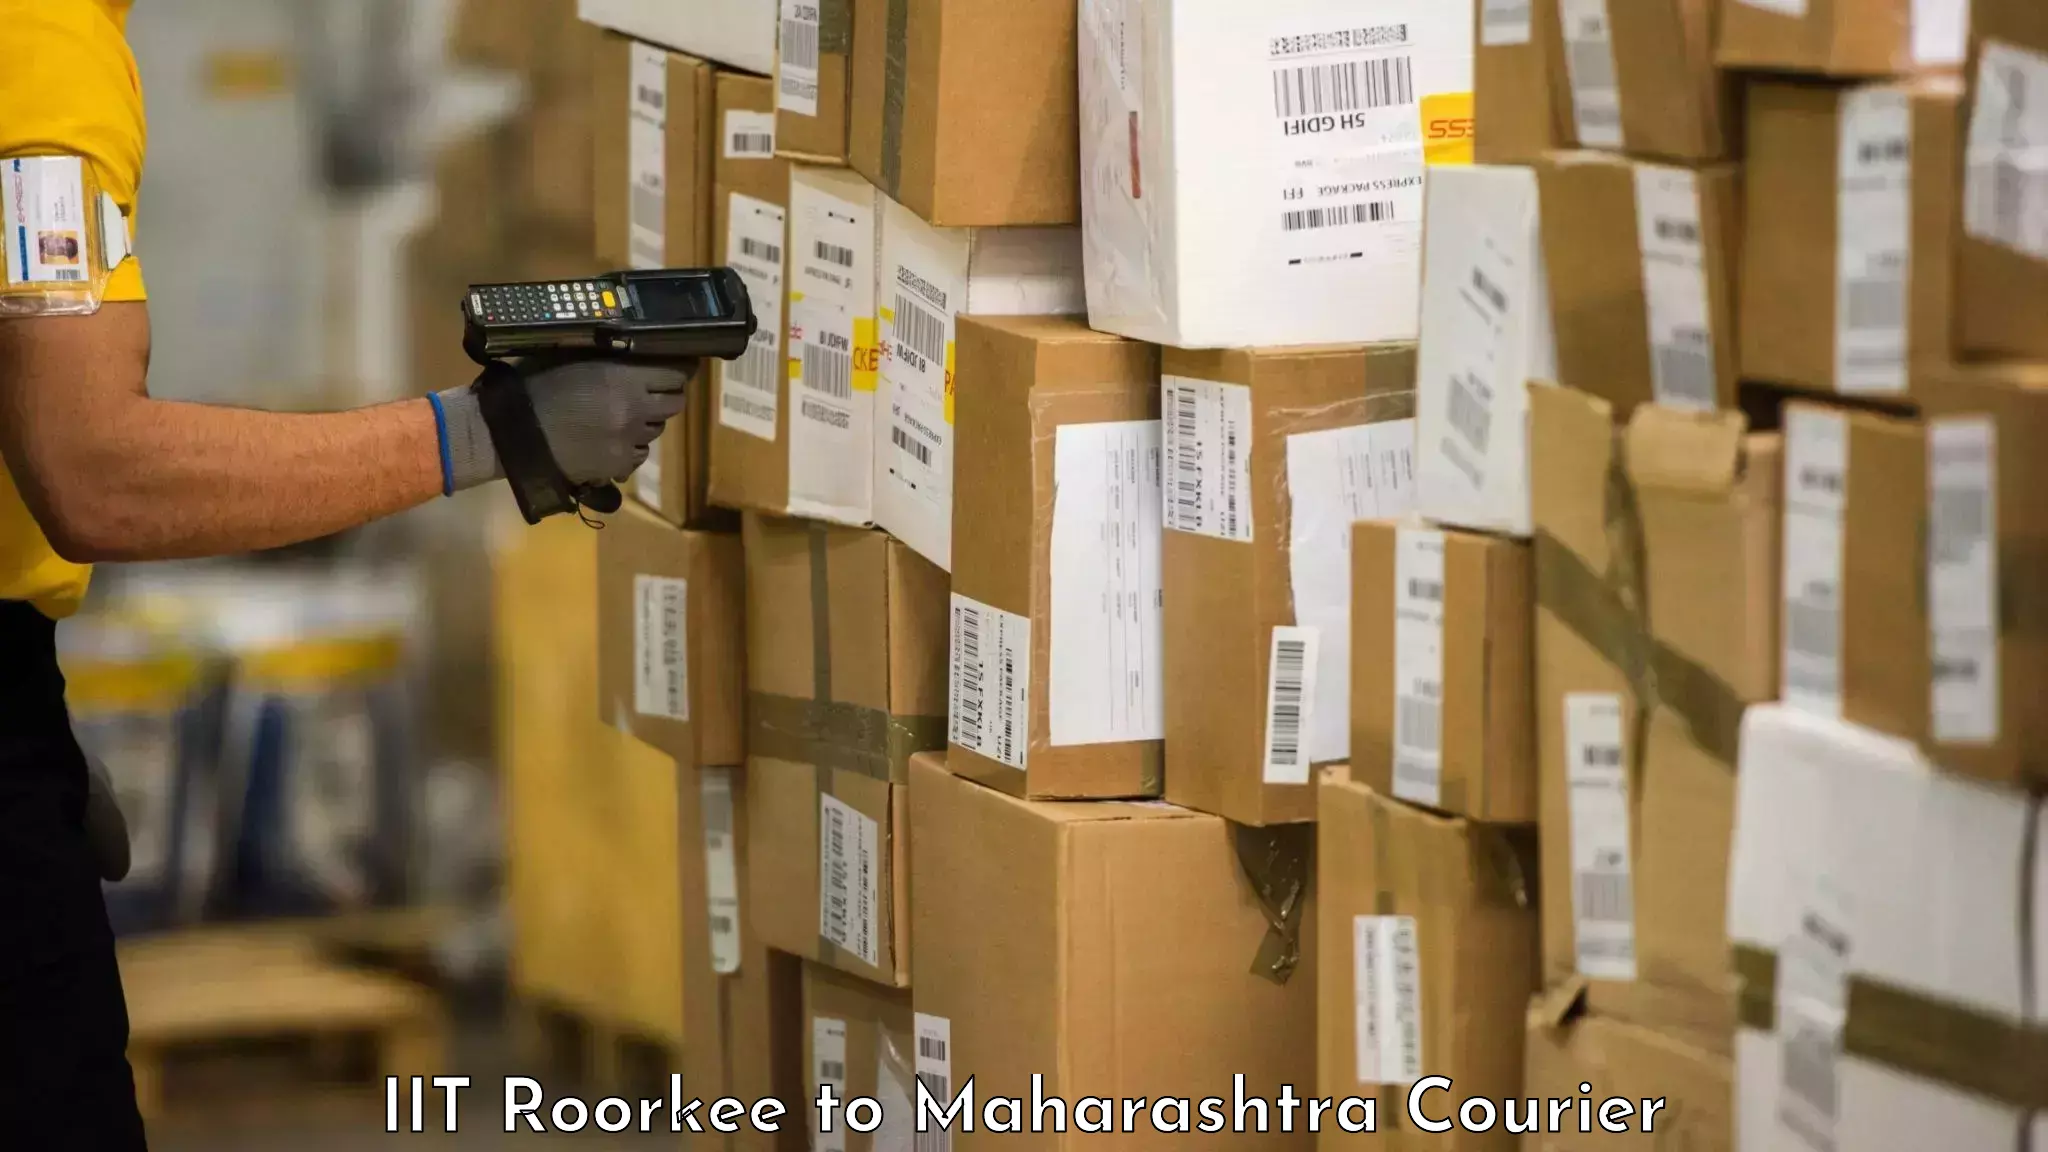 Baggage relocation service IIT Roorkee to Maharashtra